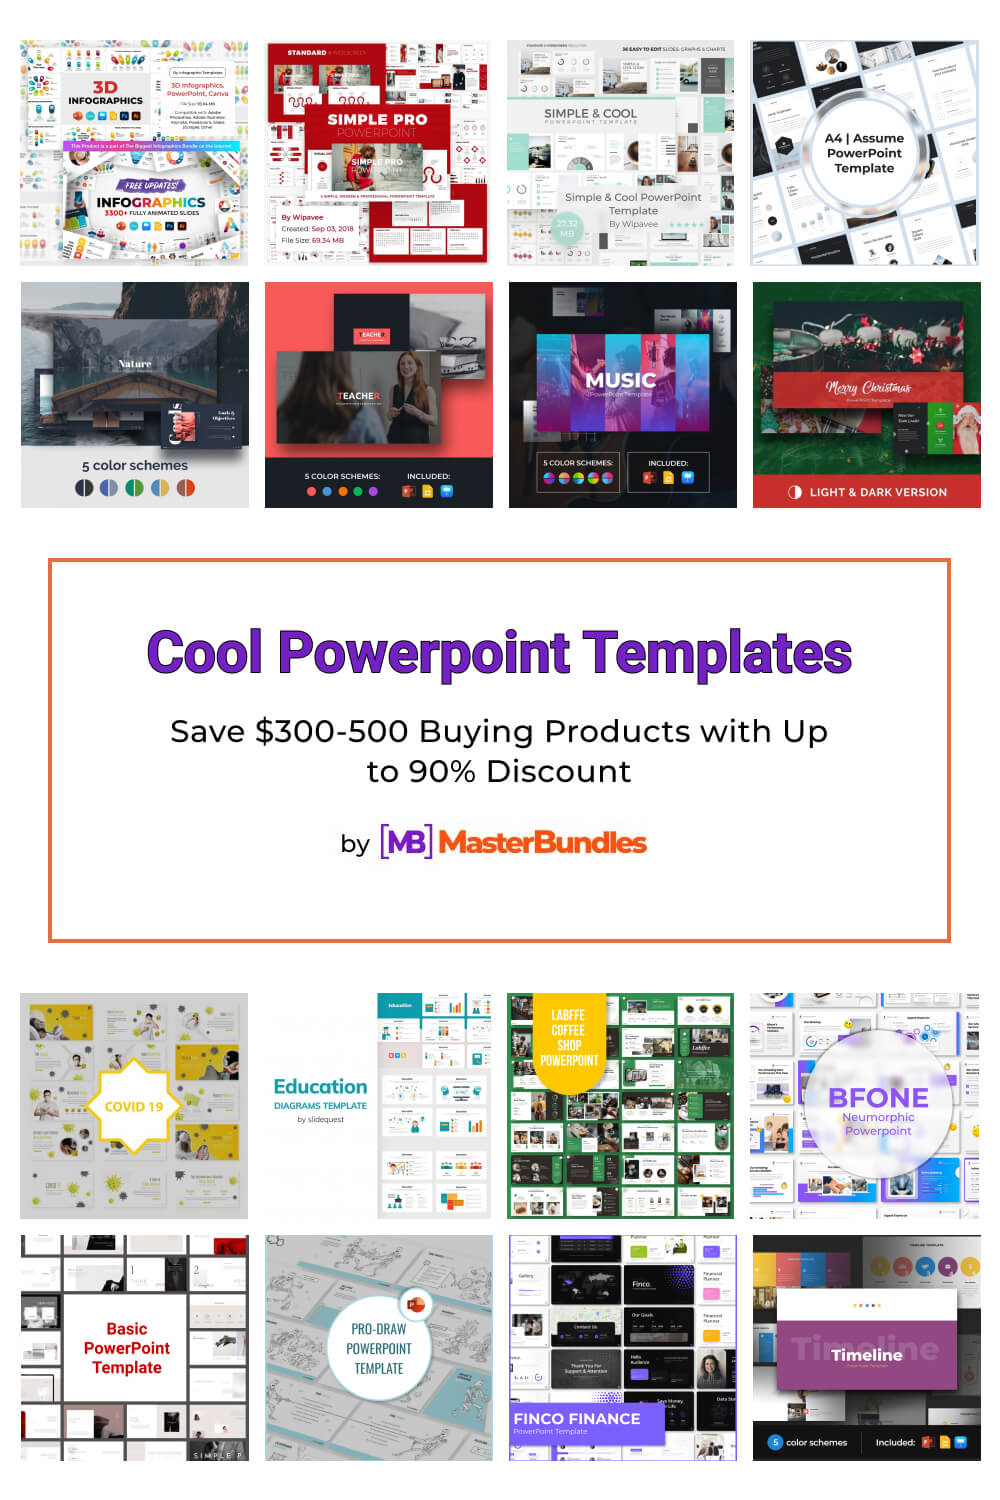 cool powerpoint templates pinterest image.